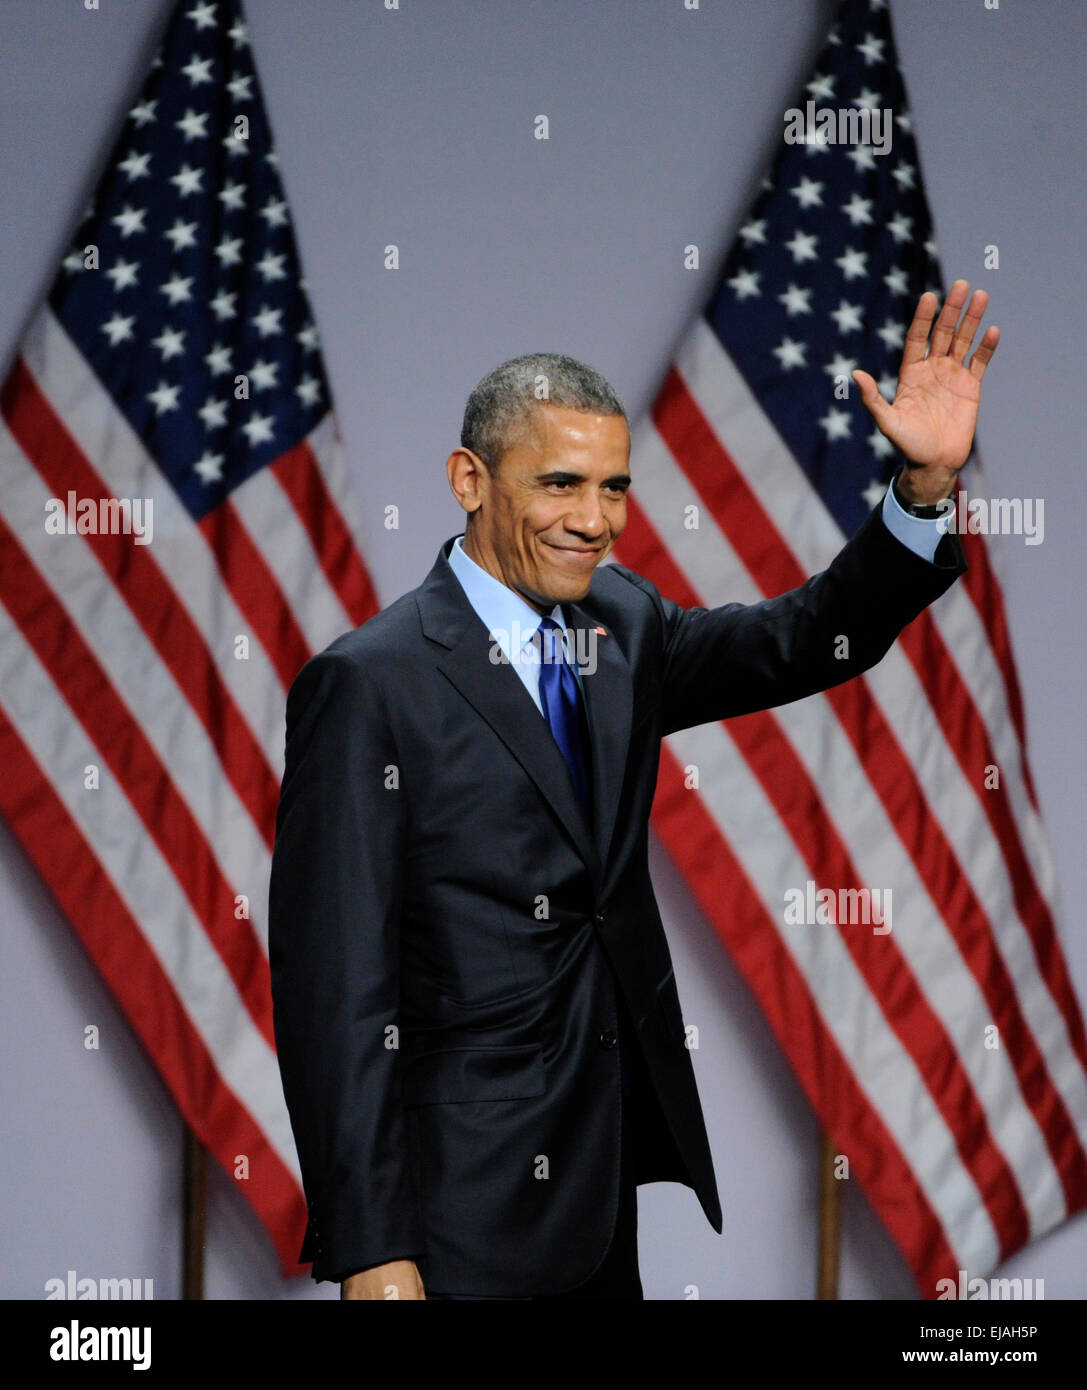 Washington, DC, USA. 23rd Mar, 2015. U.S. President Barack Obama greets audiences during the 2015 SelectUSA Investment Summit in Washington, DC, capital of the United States, March 23, 2015.U.S. President Barack Obama on Monday announced a series of new measures to lure more foreign investment and bolster economic recovery. Credit:  Bao Dandan/Xinhua/Alamy Live News Stock Photo